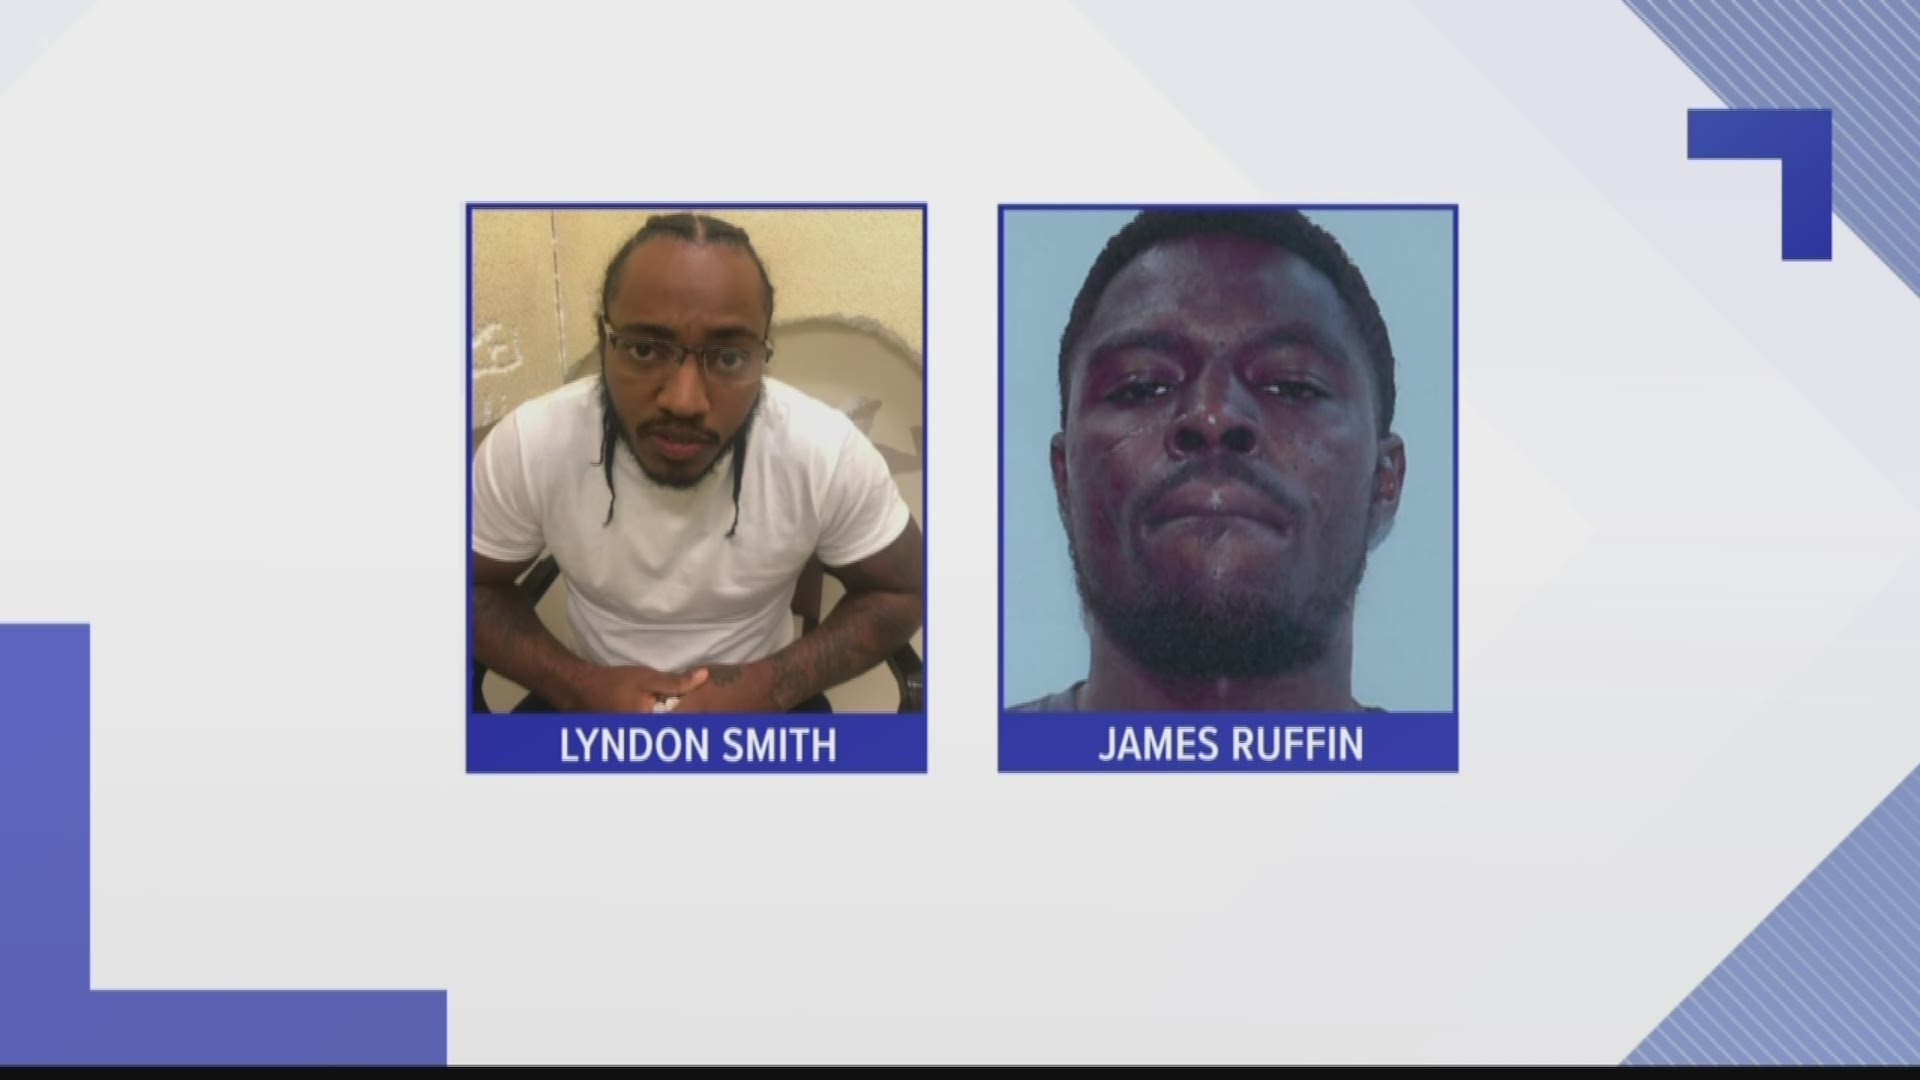 Police arrested Lyndon "Sas" Smith, 26, and James Ruffin, 27, Thursday in connection to the case. Sas is known for his appearances on VH1's "Love & Hip Hop: Atlanta.